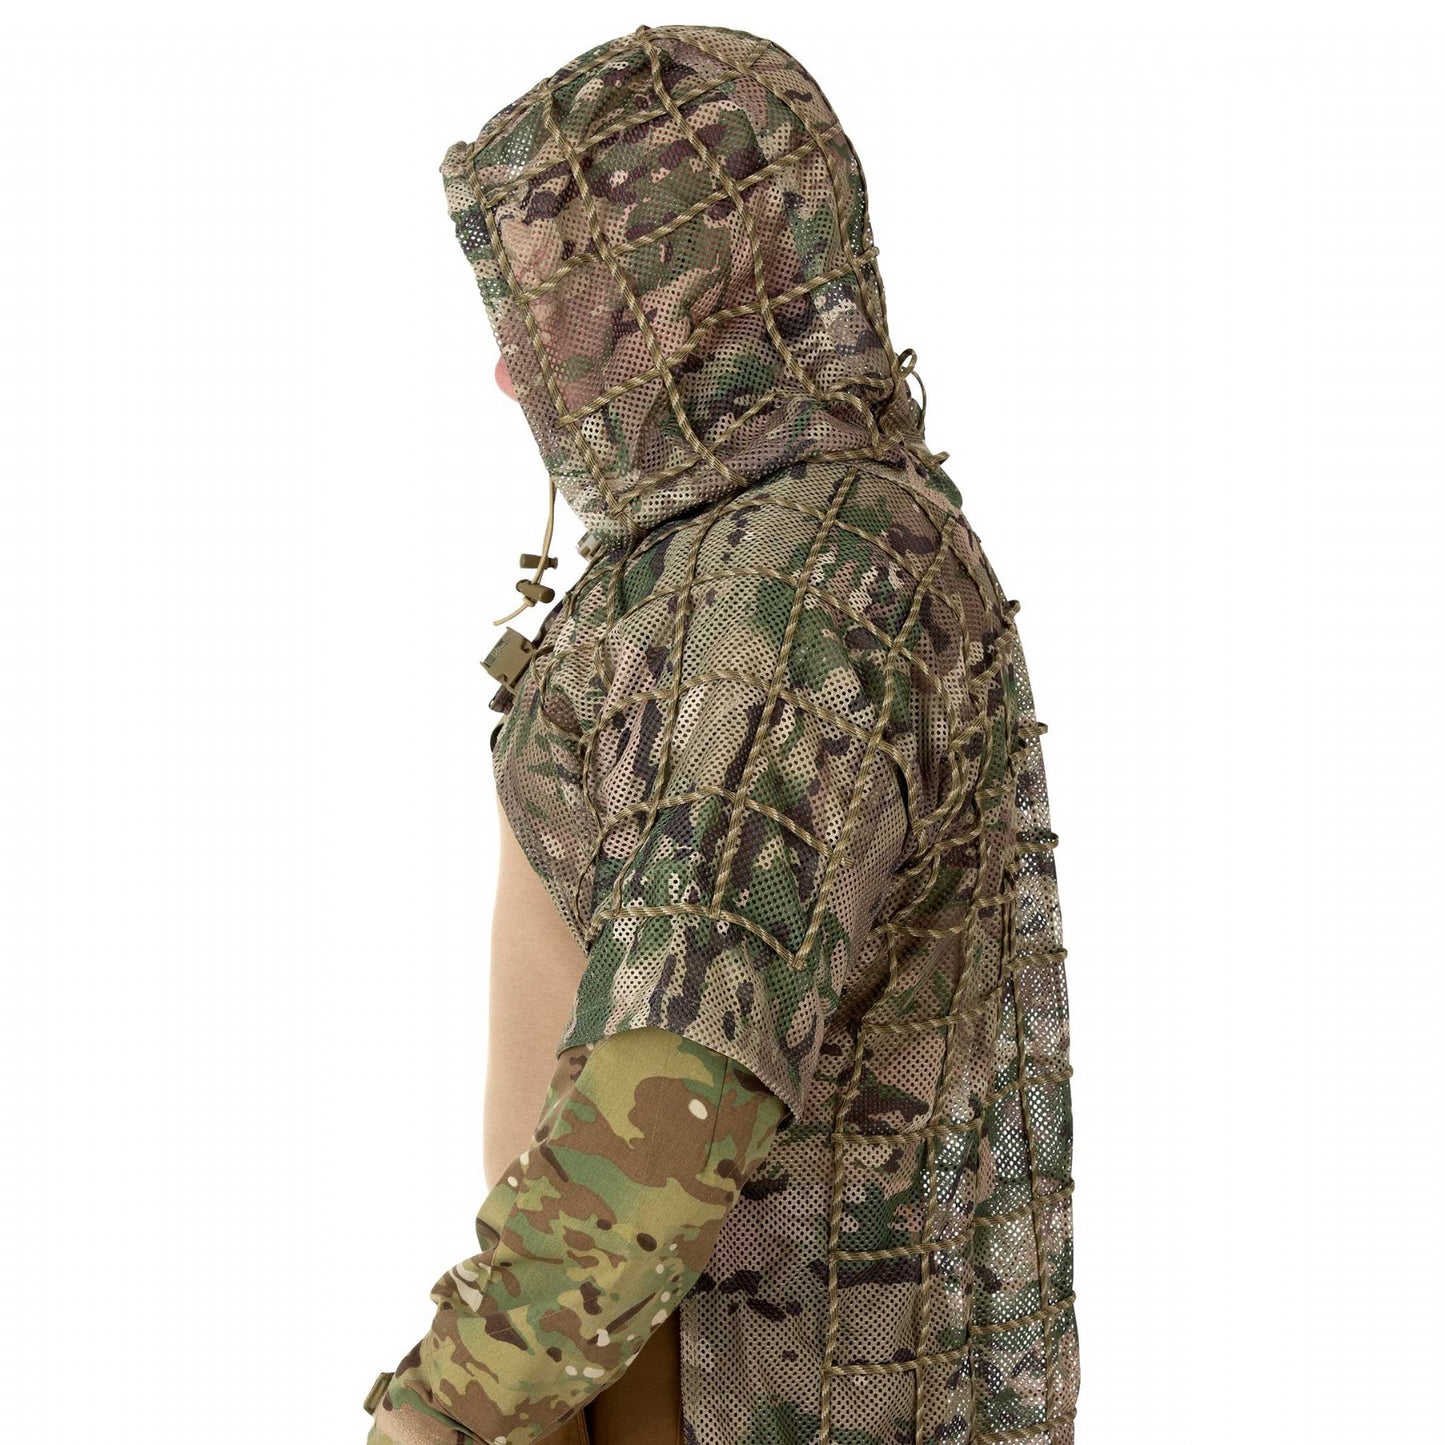 The Valhalla Ghillie suit is designed for Military and Law Enforcement who require visual camouflage and concealment. It features an integrated hood and wide 550 cord grid work for garnish and foliage attachment.